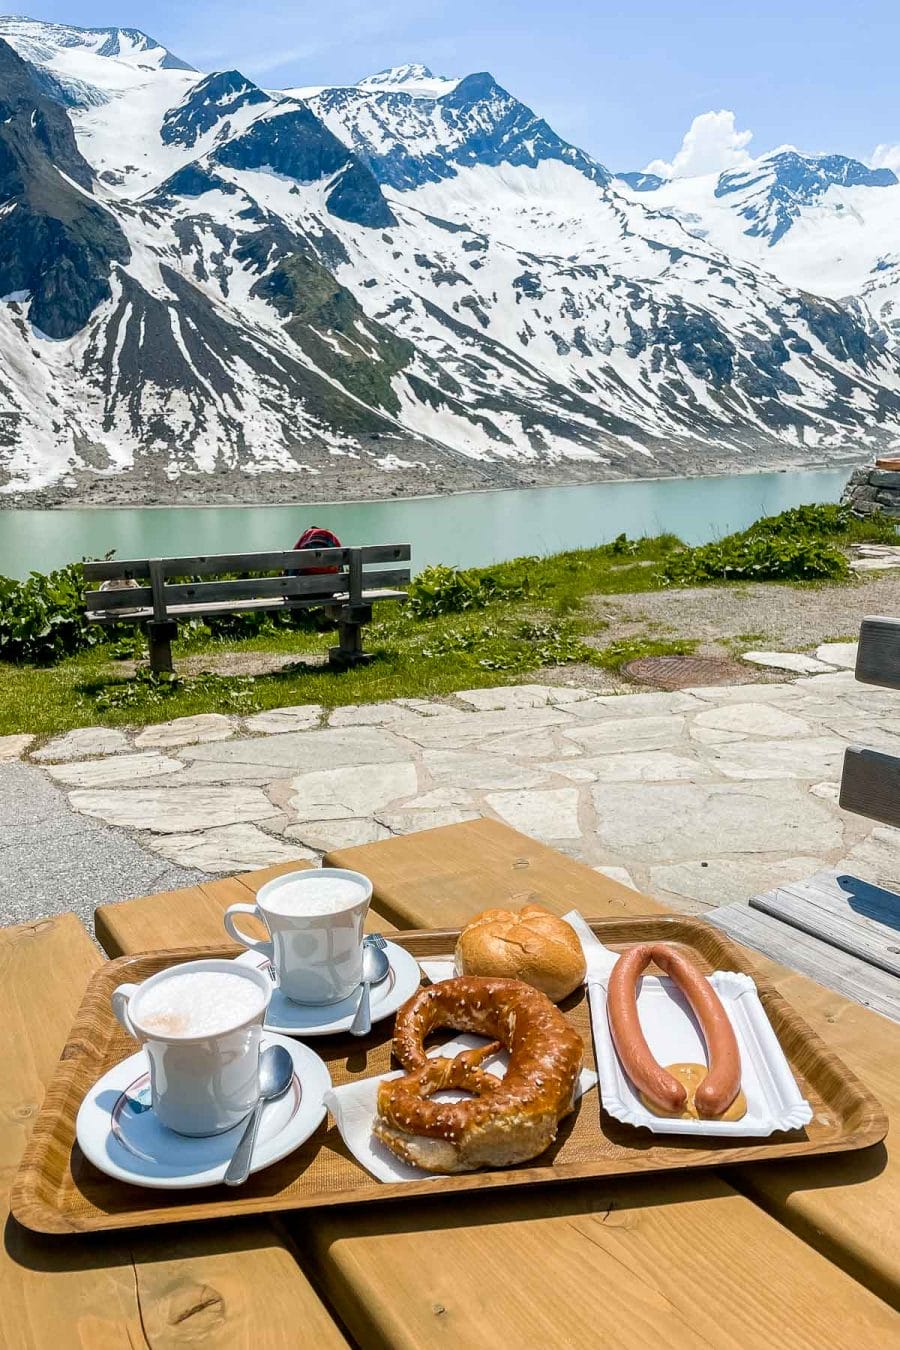 Lunch at Stausee Mooserboden, Austria